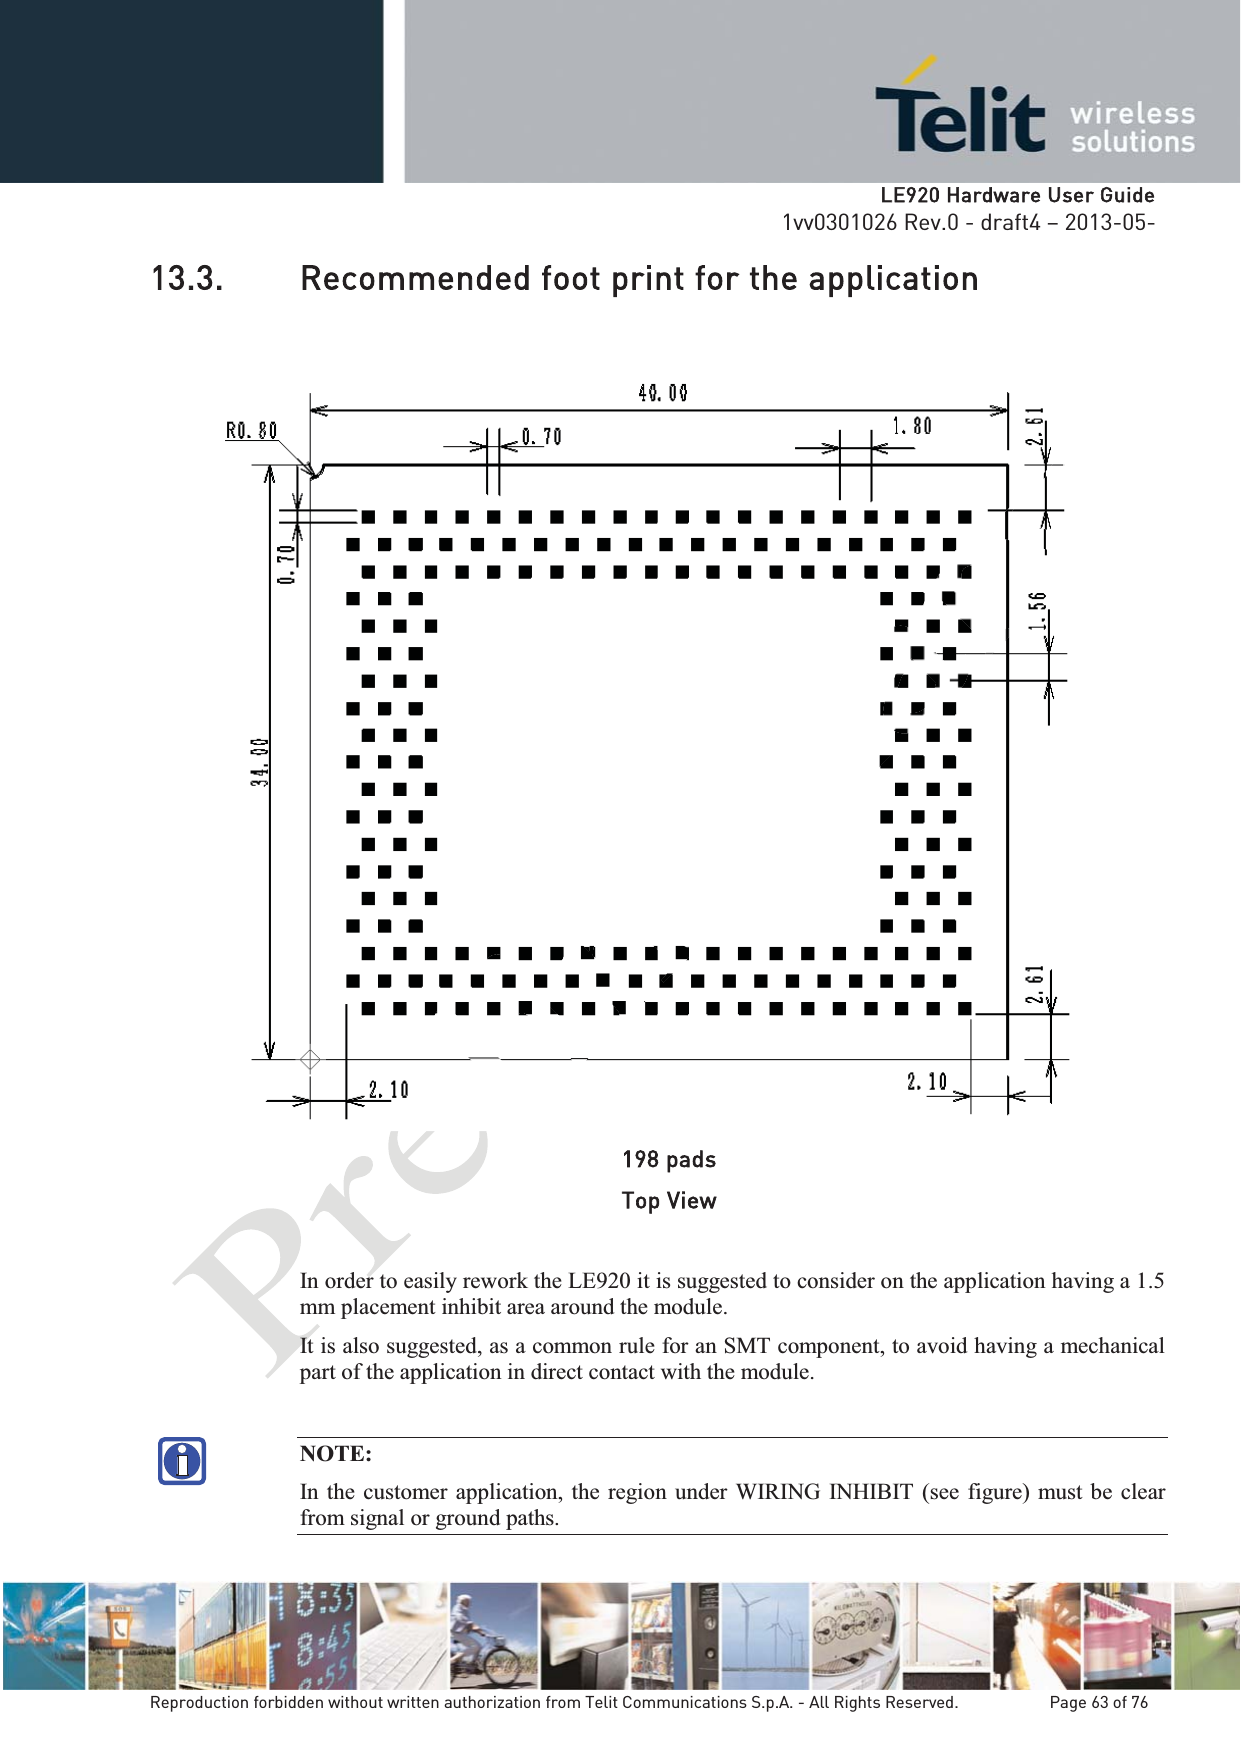   LLE920 Hardware User Guide1vv0301026 Rev.0 - draft4 – 2013-05-Reproduction forbidden without written authorization from Telit Communications S.p.A. - All Rights Reserved.    Page 63 of 76 13.3. Recommended foot print for the application  198 pads Top View In order to easily rework the LE920 it is suggested to consider on the application having a 1.5 mm placement inhibit area around the module.  It is also suggested, as a common rule for an SMT component, to avoid having a mechanical part of the application in direct contact with the module.  NOTE: In the customer application, the region under WIRING INHIBIT (see figure) must be clear from signal or ground paths. 